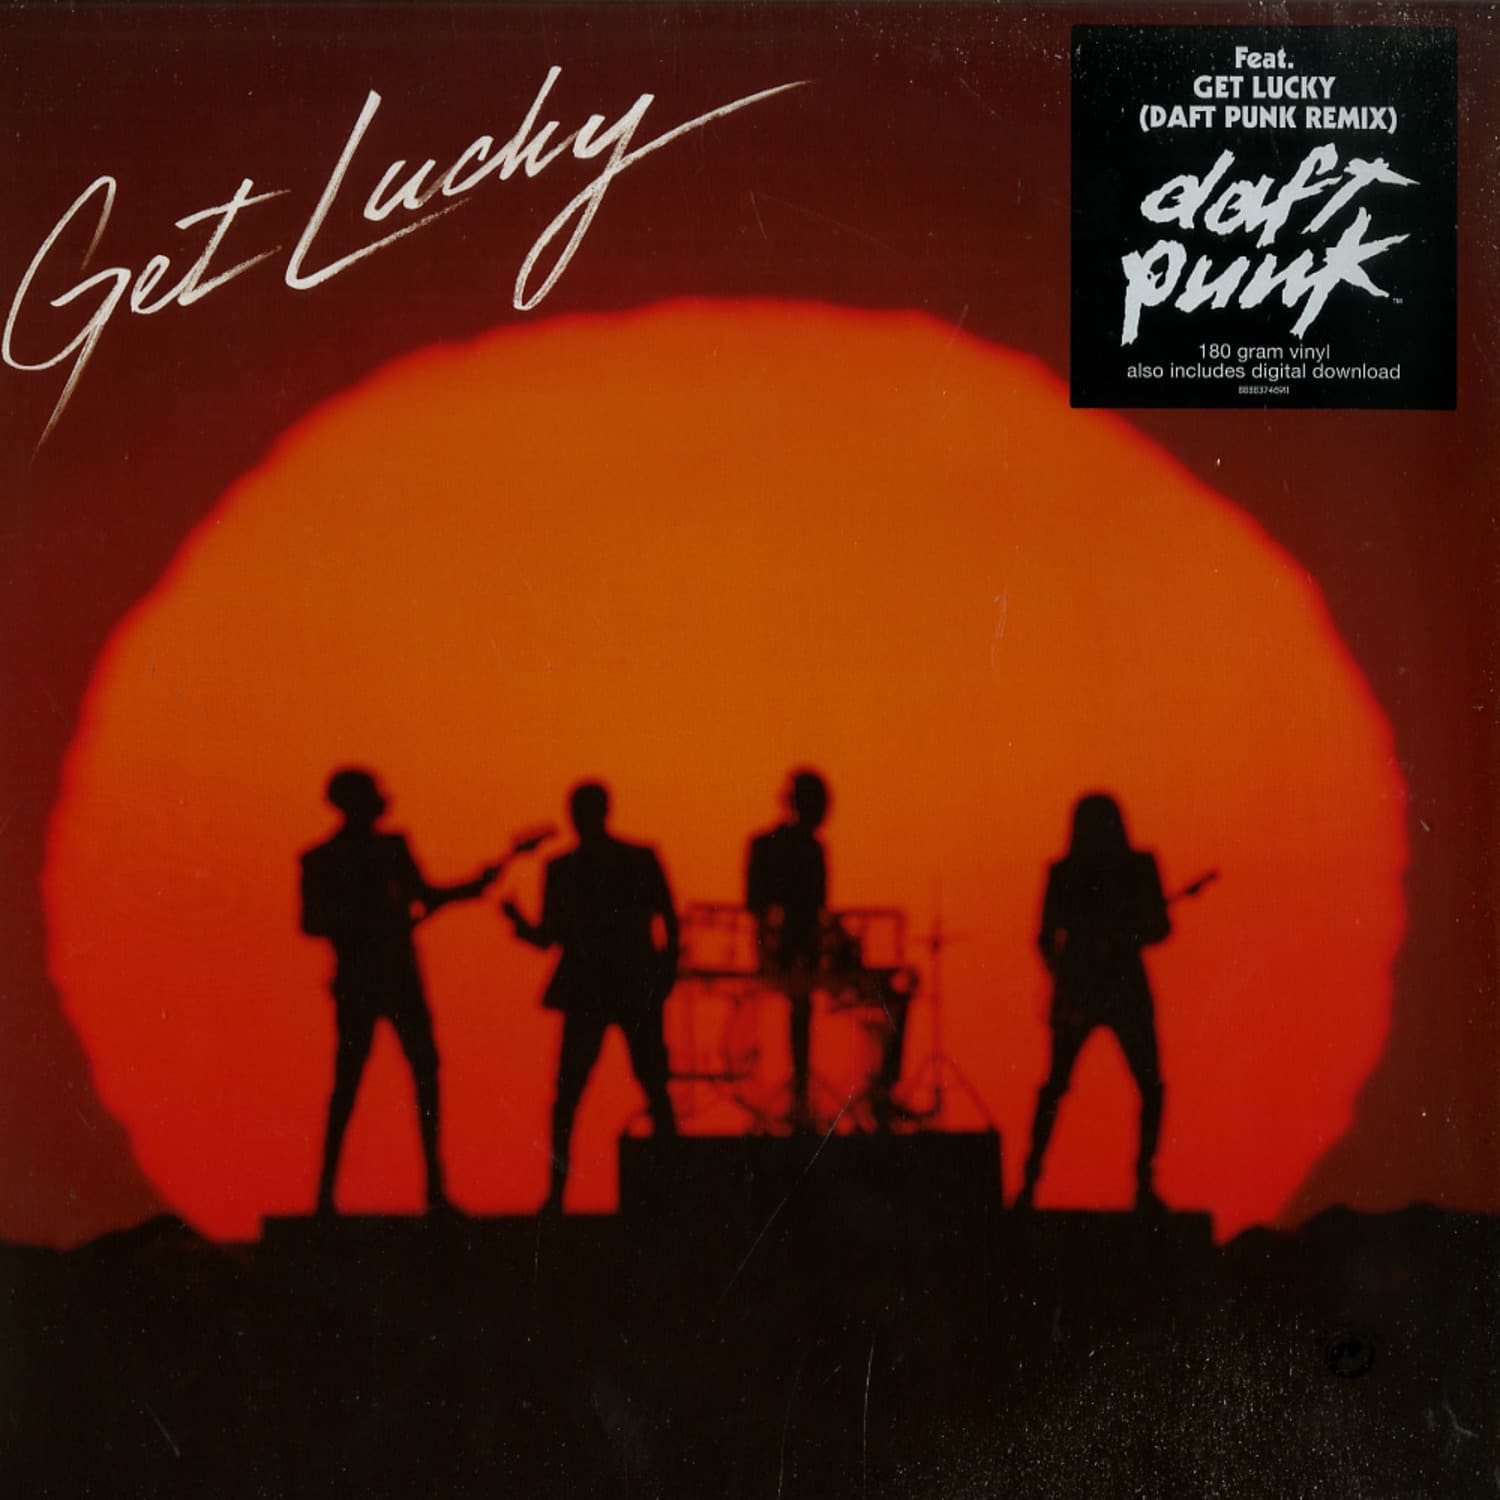 Daft Punk feat. Pharrell Williams and Nile Rodgers - GET LUCKY 